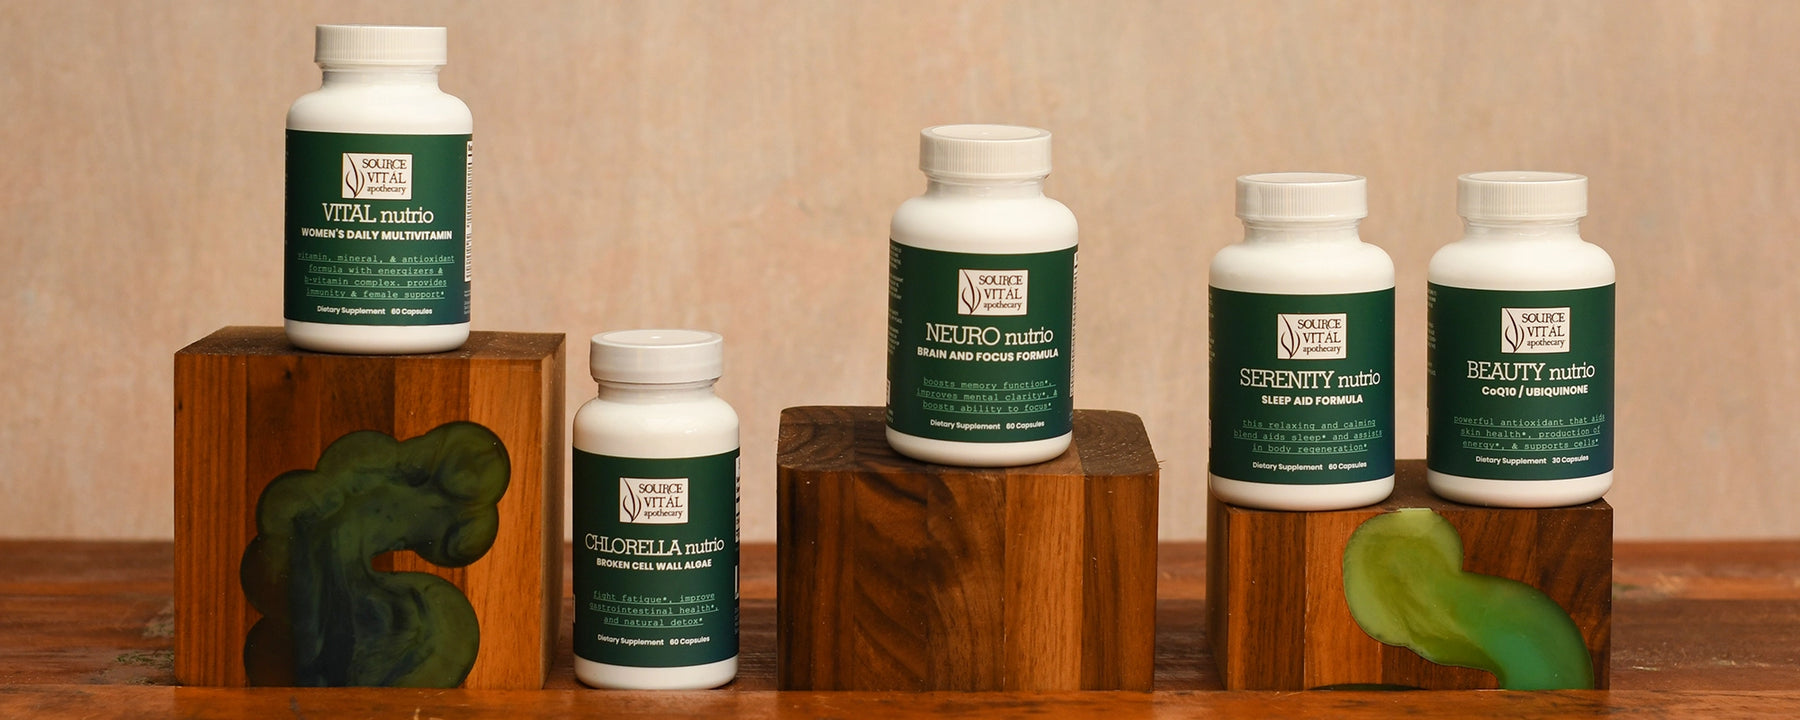 Nutrio Collection - Nutritional Supplements and Formulas for Better Internal Health and Skin